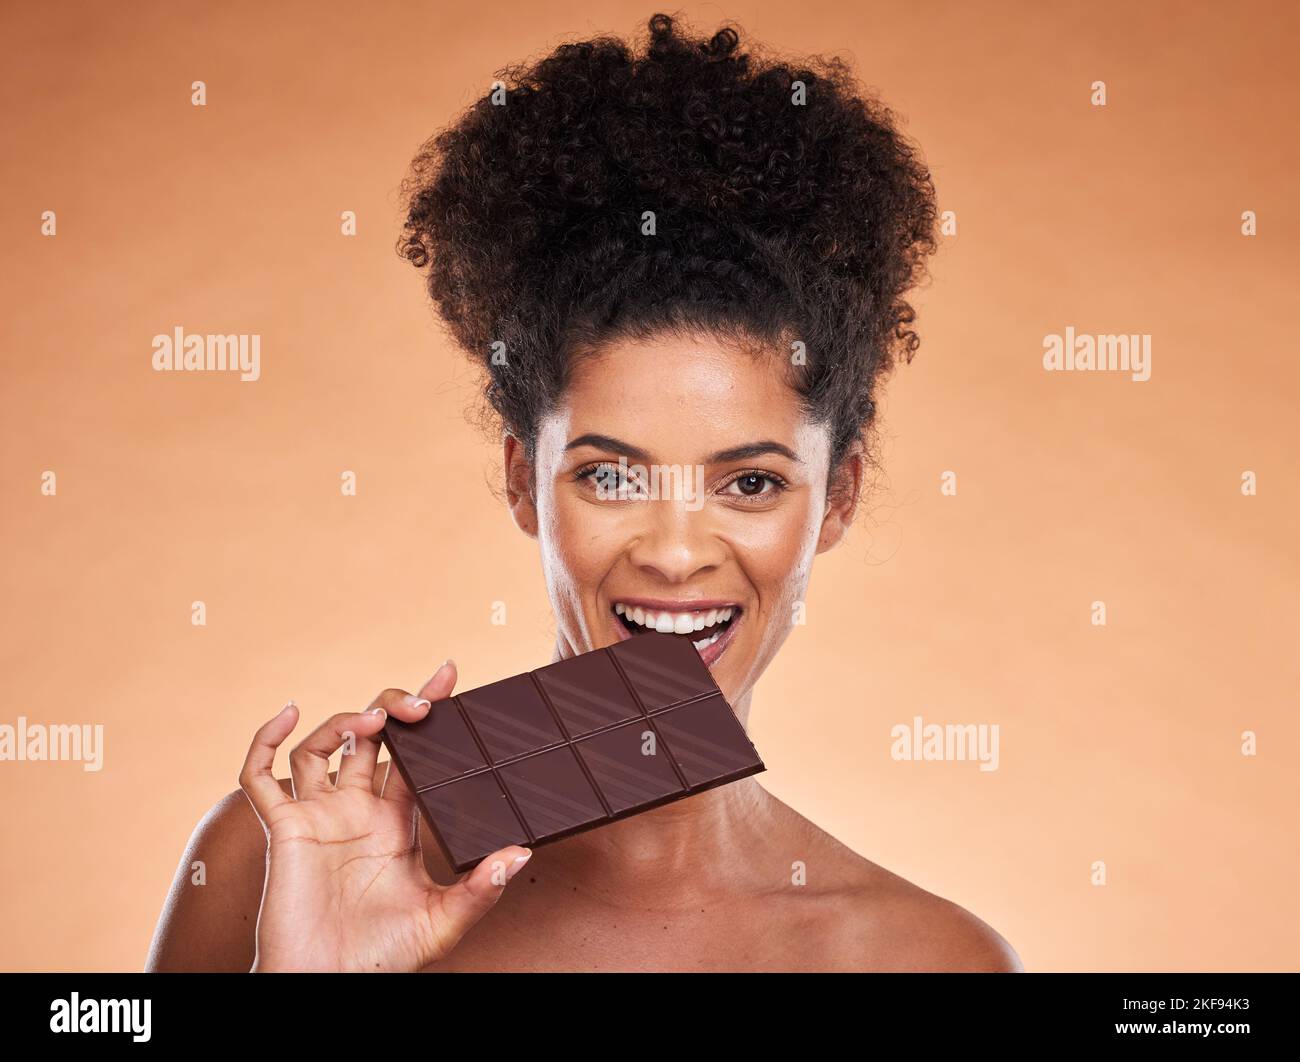 Chocolate, happy woman and beauty portrait, studio background and eating sweets, cacao dessert and enjoy sugar. Black woman bite chocolate bar, cocoa Stock Photo